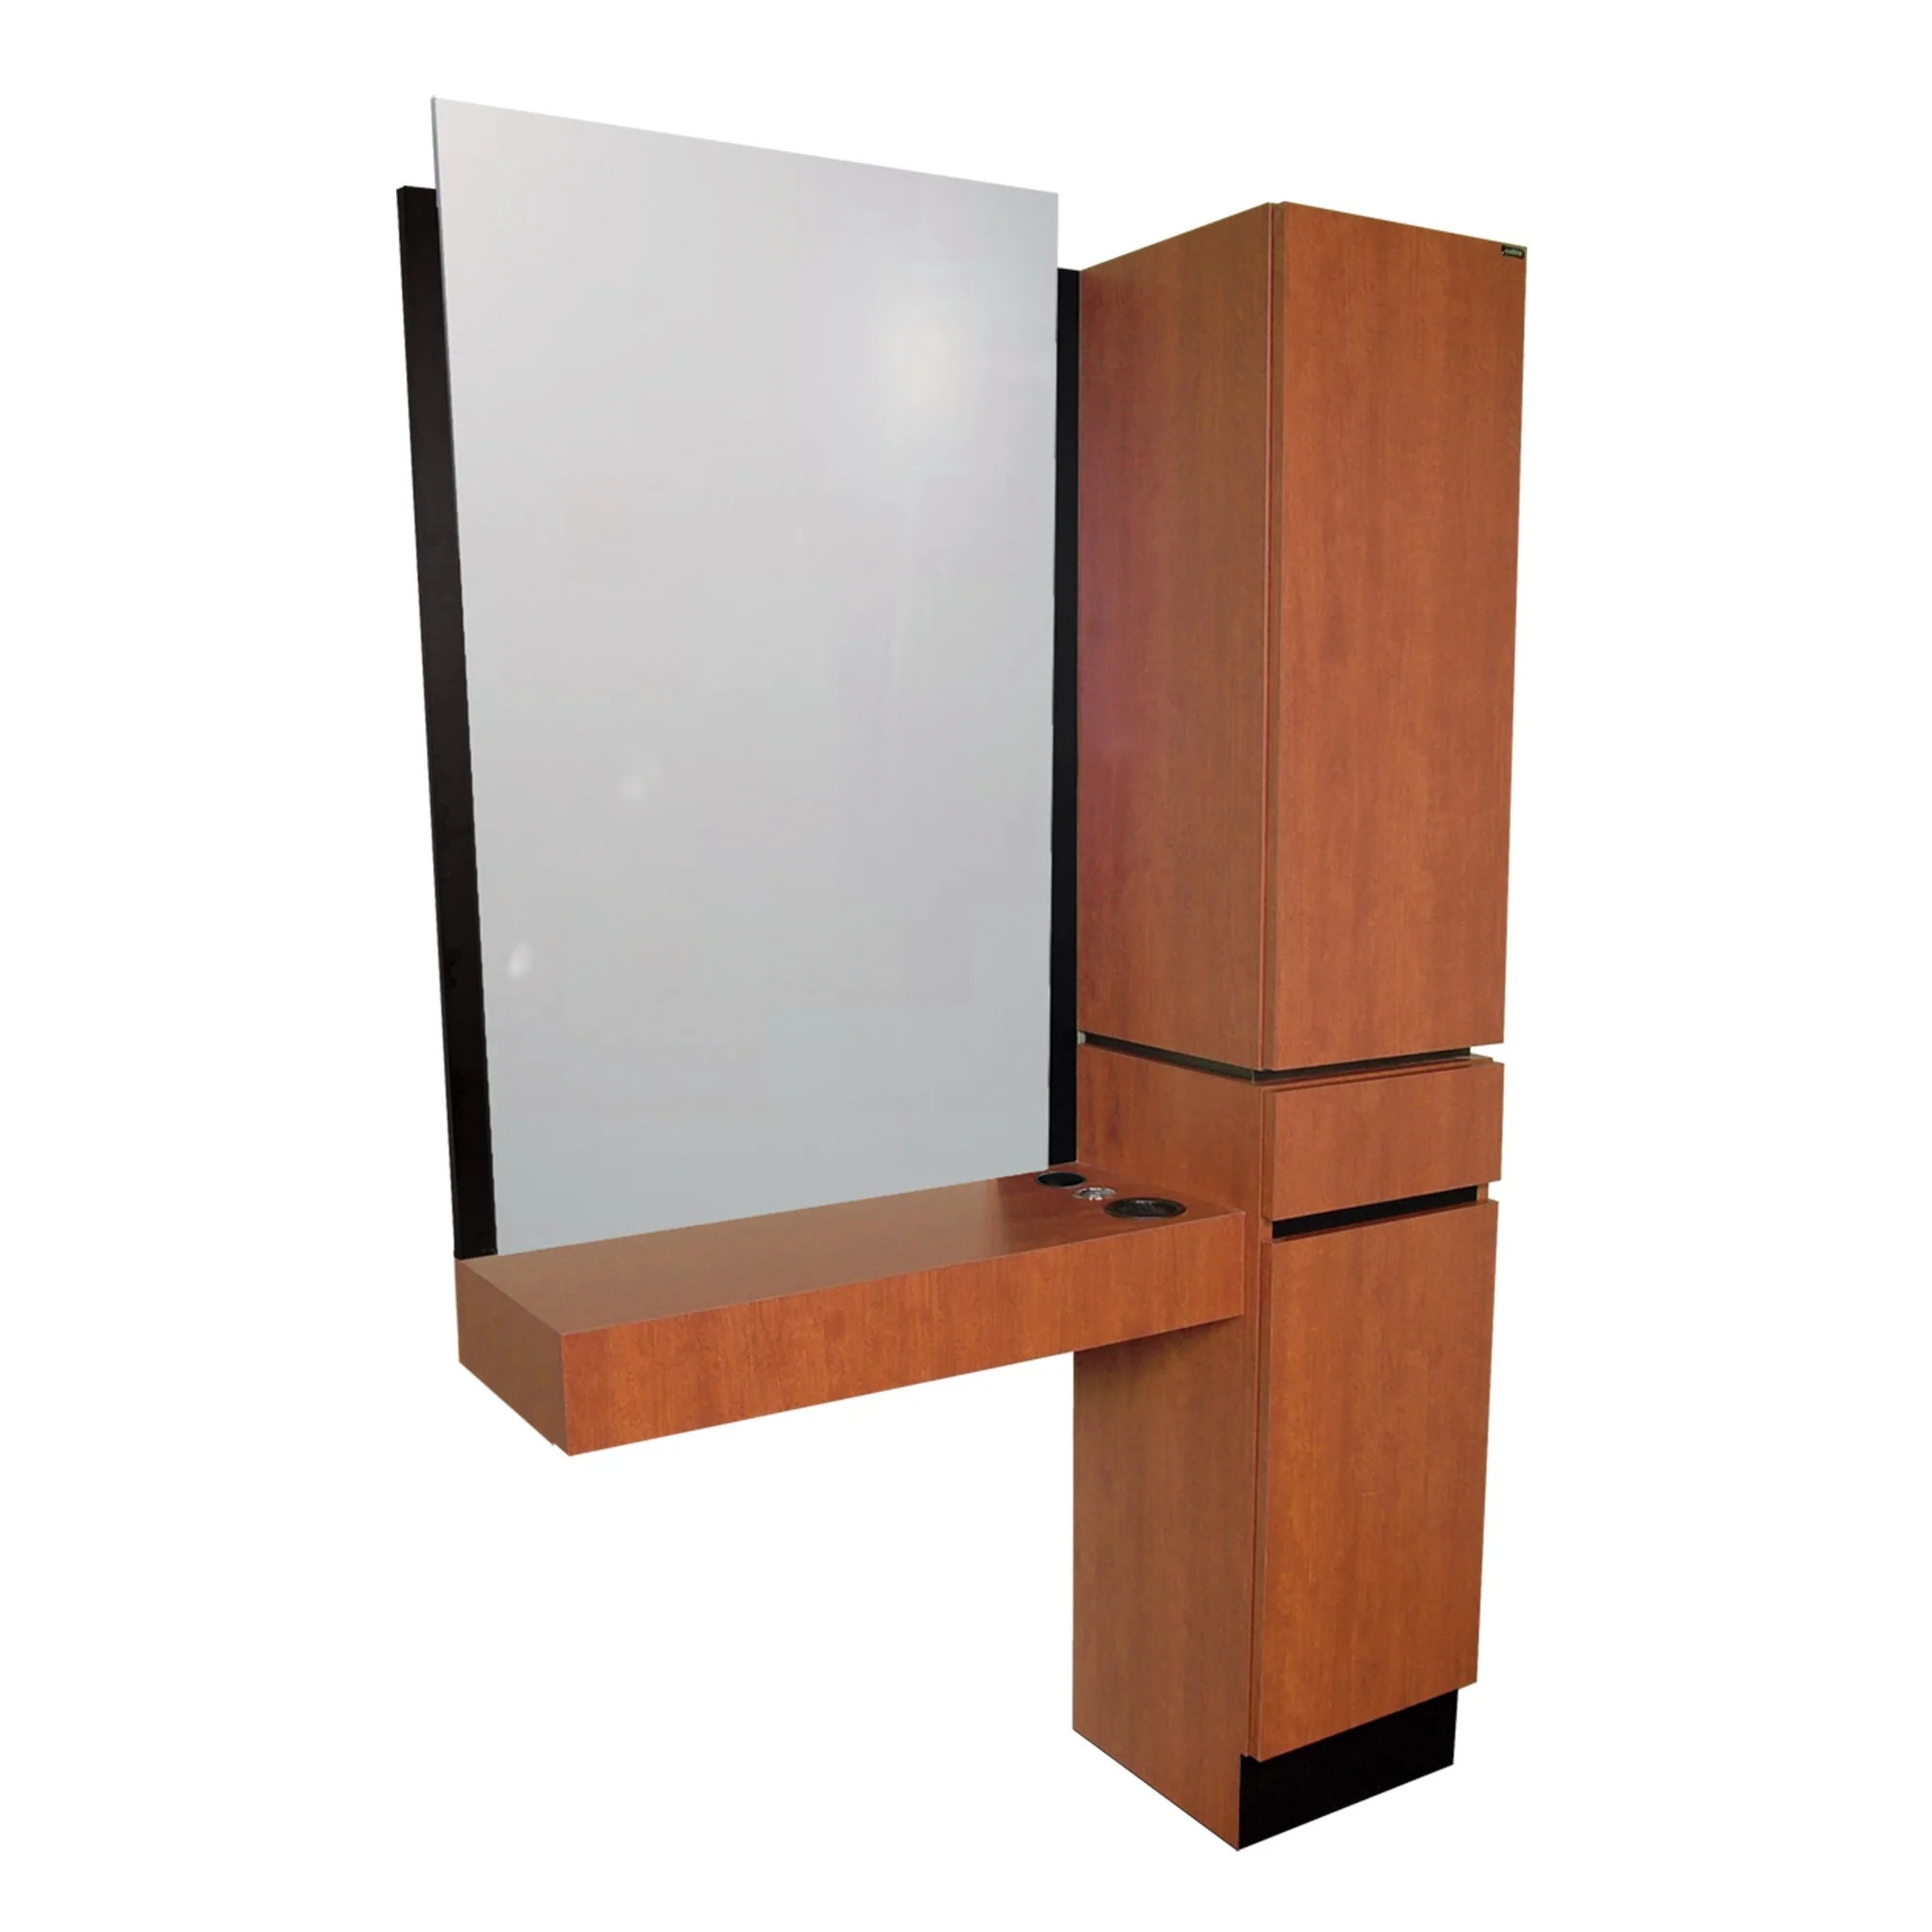 Collins Reve Tower Styling Station with Storage - COL-467-48